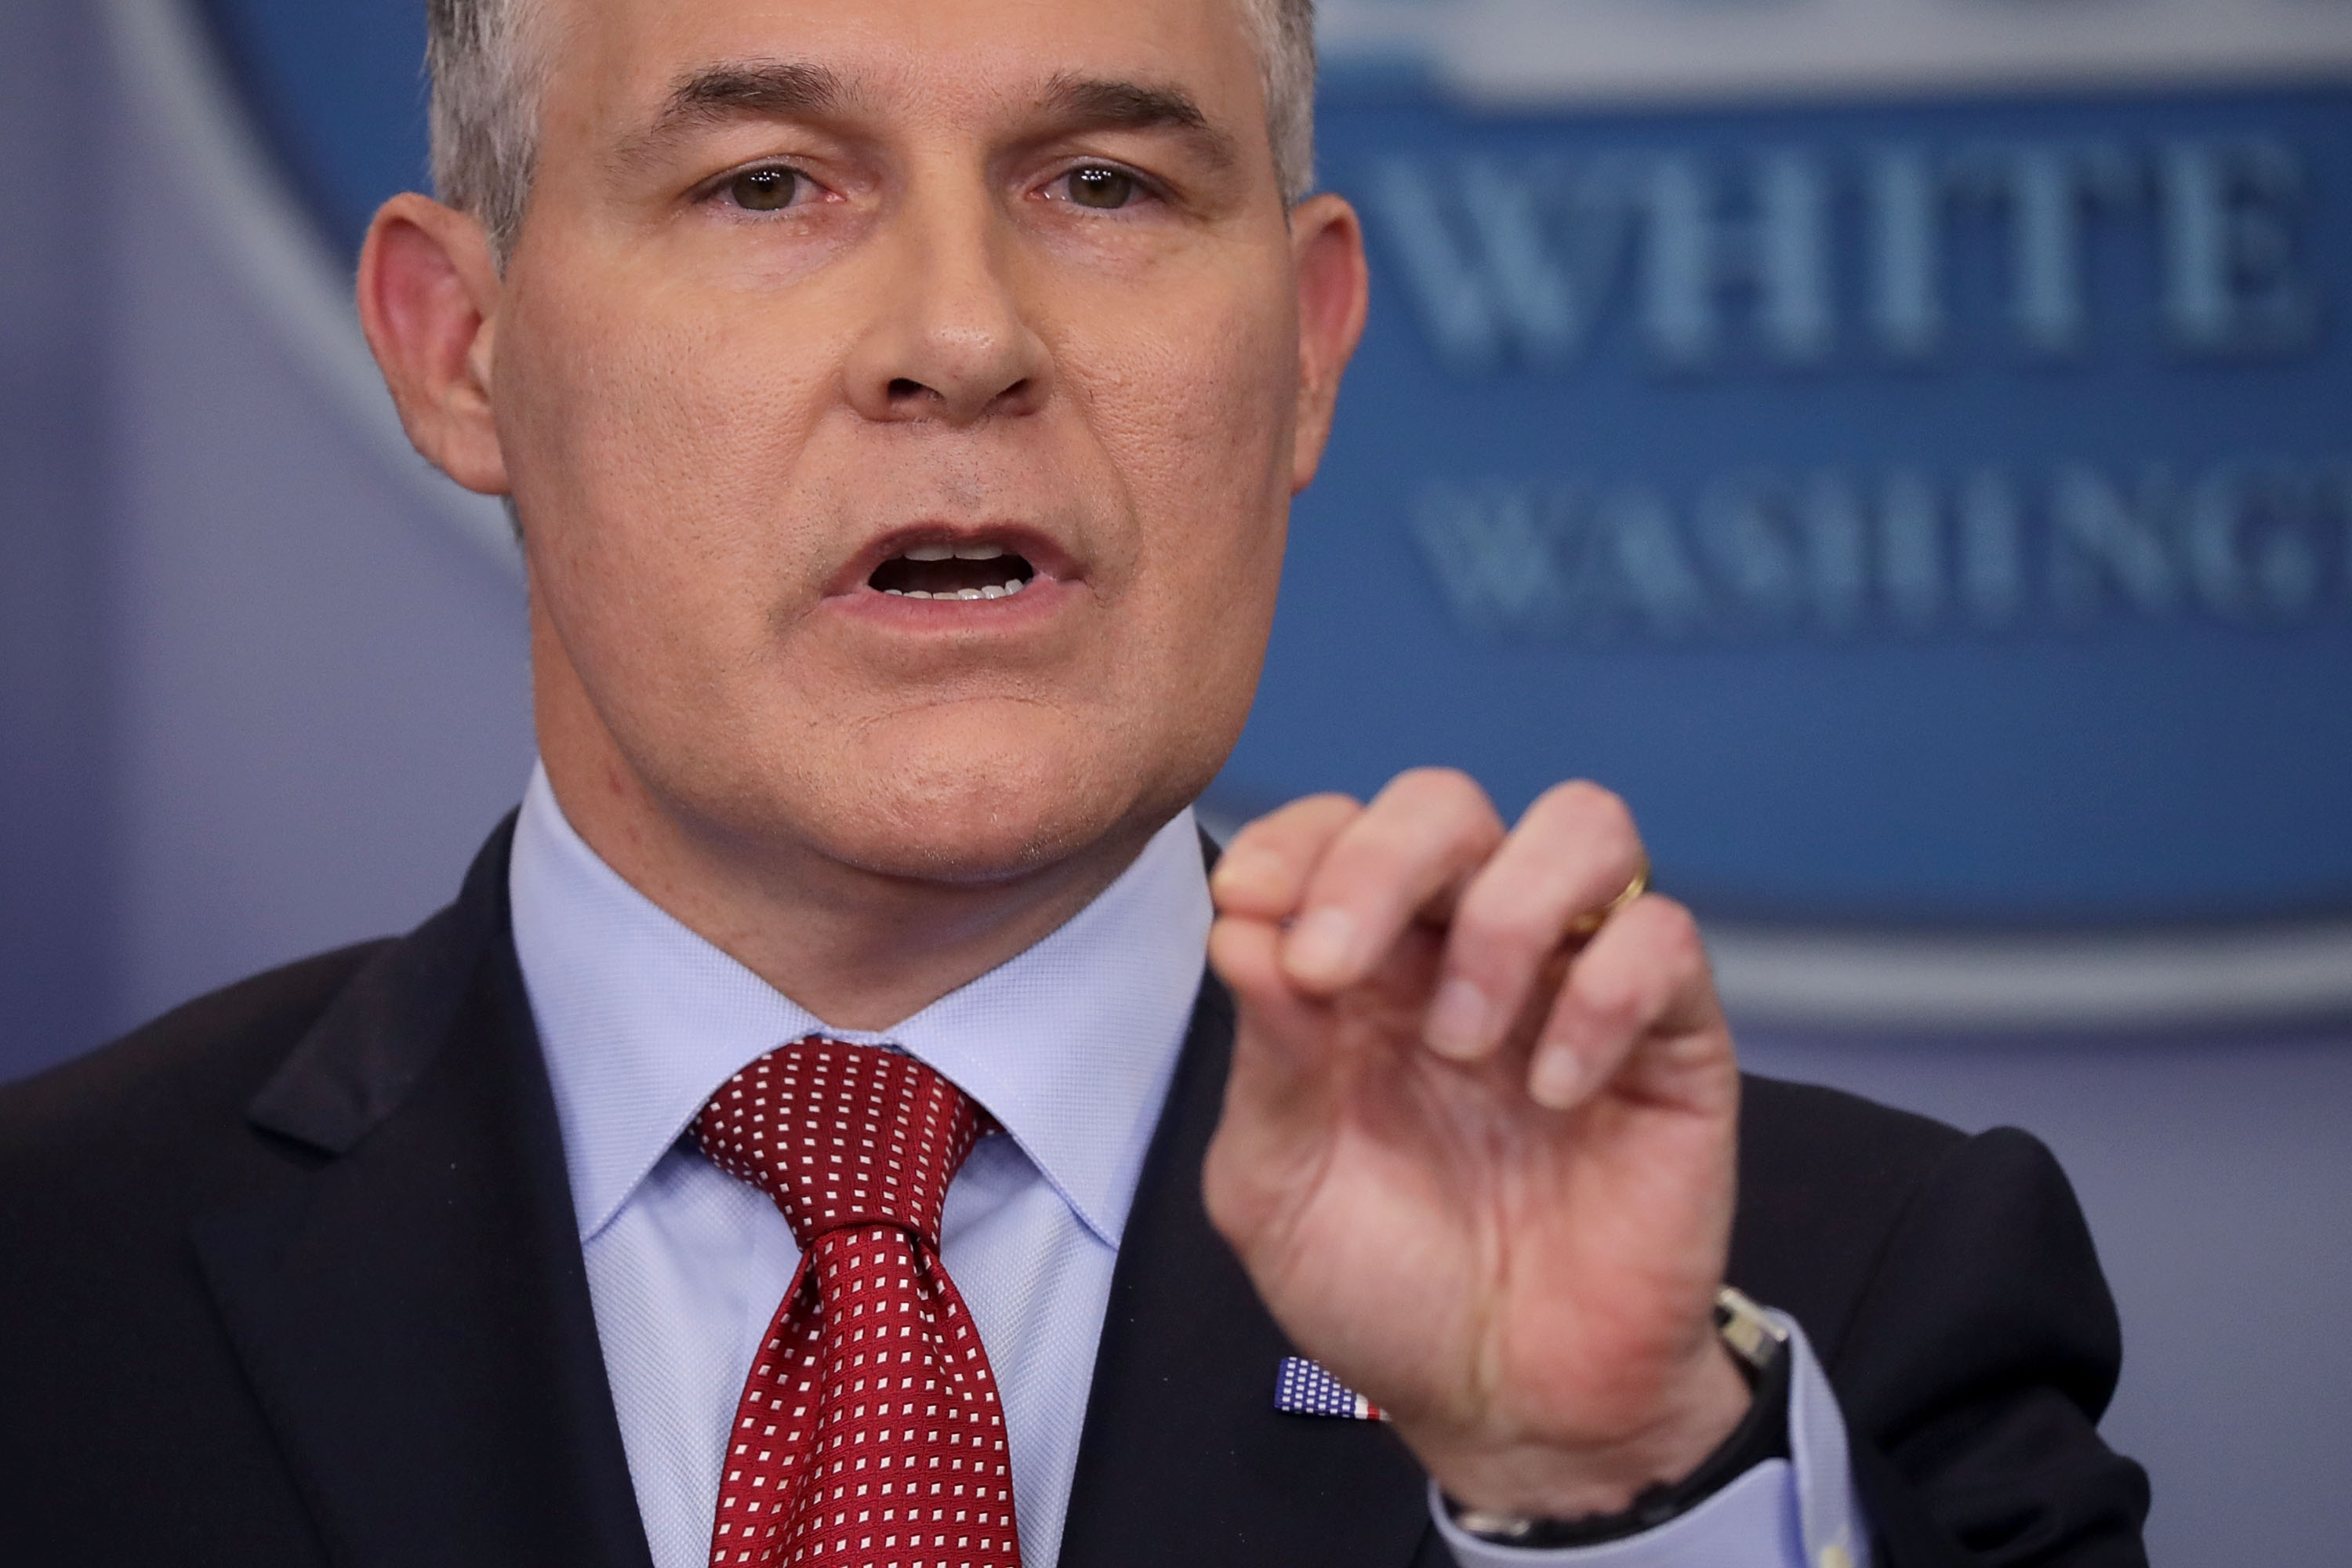 Environmental Protection Agency Administrator Scott Pruitt answers reporters' questions during a briefing at the White House June 2, 2017. (Credit: Chip Somodevilla/Getty Images)